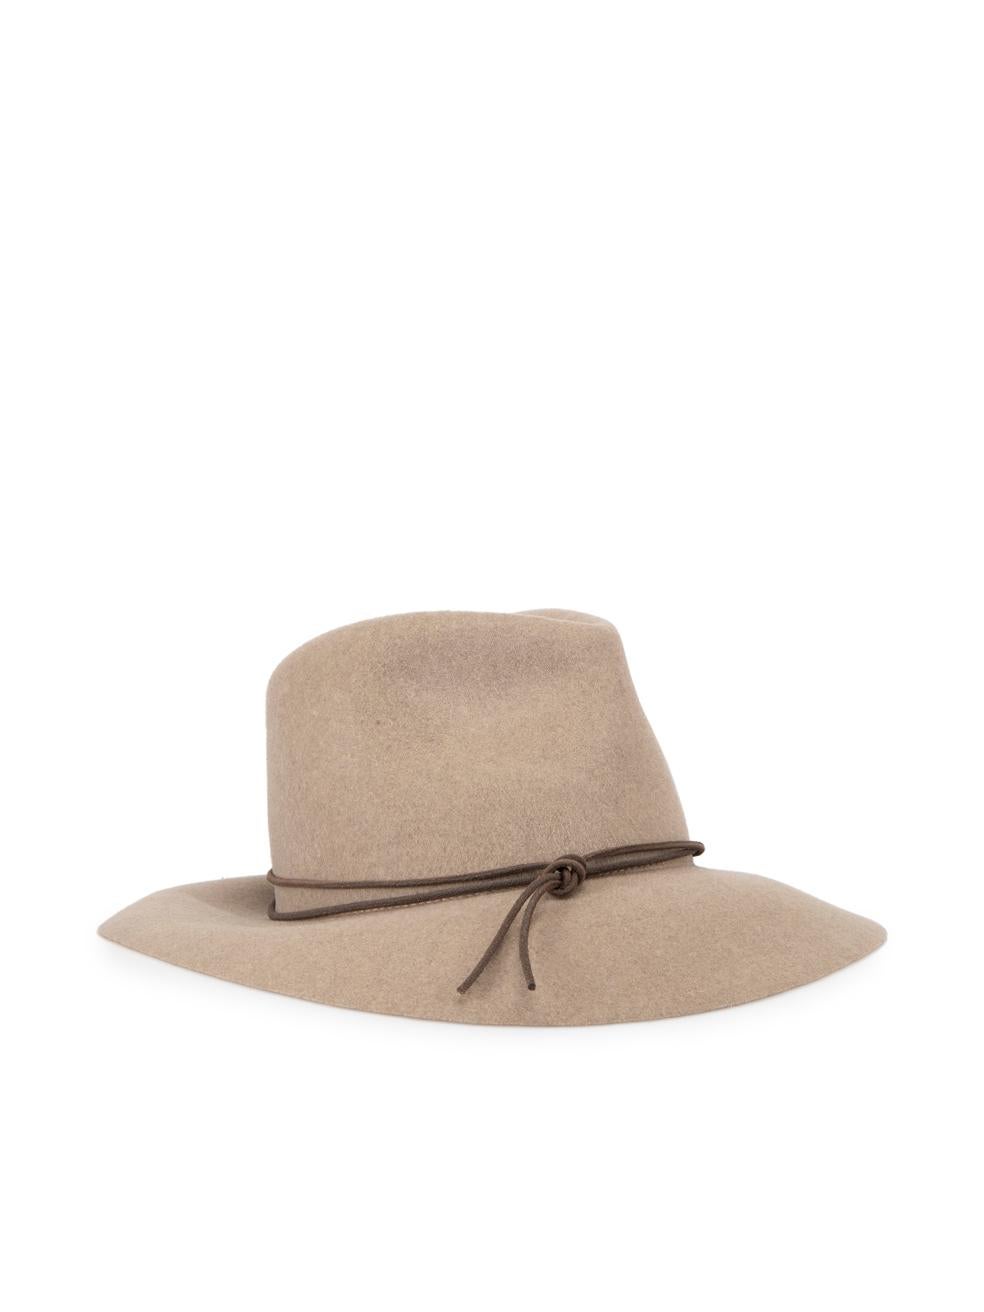 CONDITION is Very good. Hardly any visible wear to hat is evident on this used Isabel Marant designer resale item.



Details


Brown

Wool

Fedora

Brown string tie detail



 

Made in Italy 

 

Composition

EXTERIOR: Wool

 

Size &